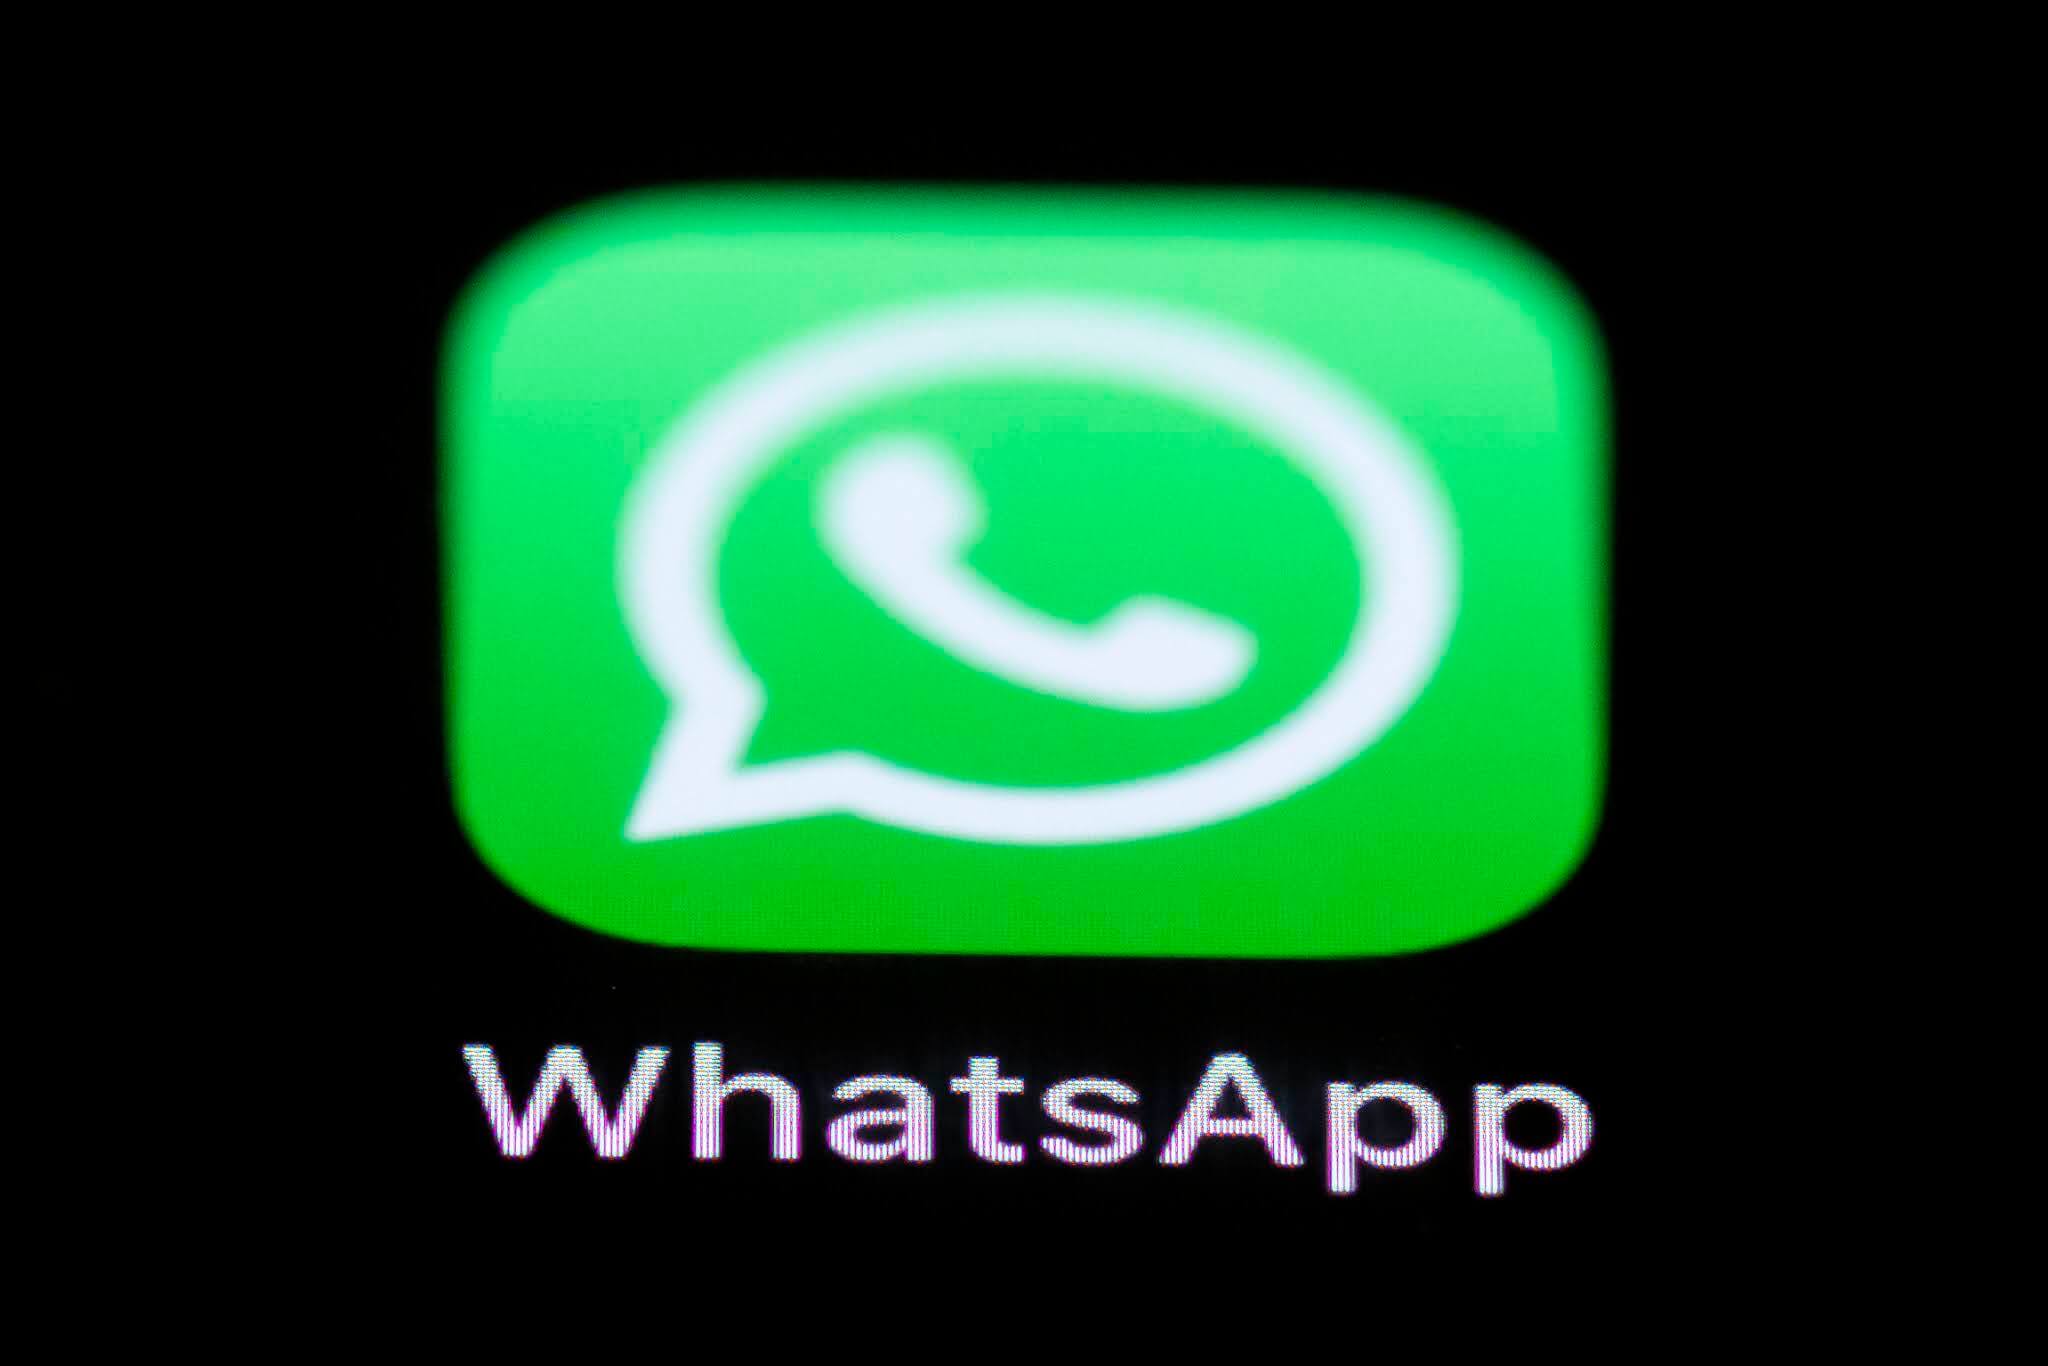 A Vulnerability In WhatsApp’s Image Filter May Have Lead To User Data Being Stolen